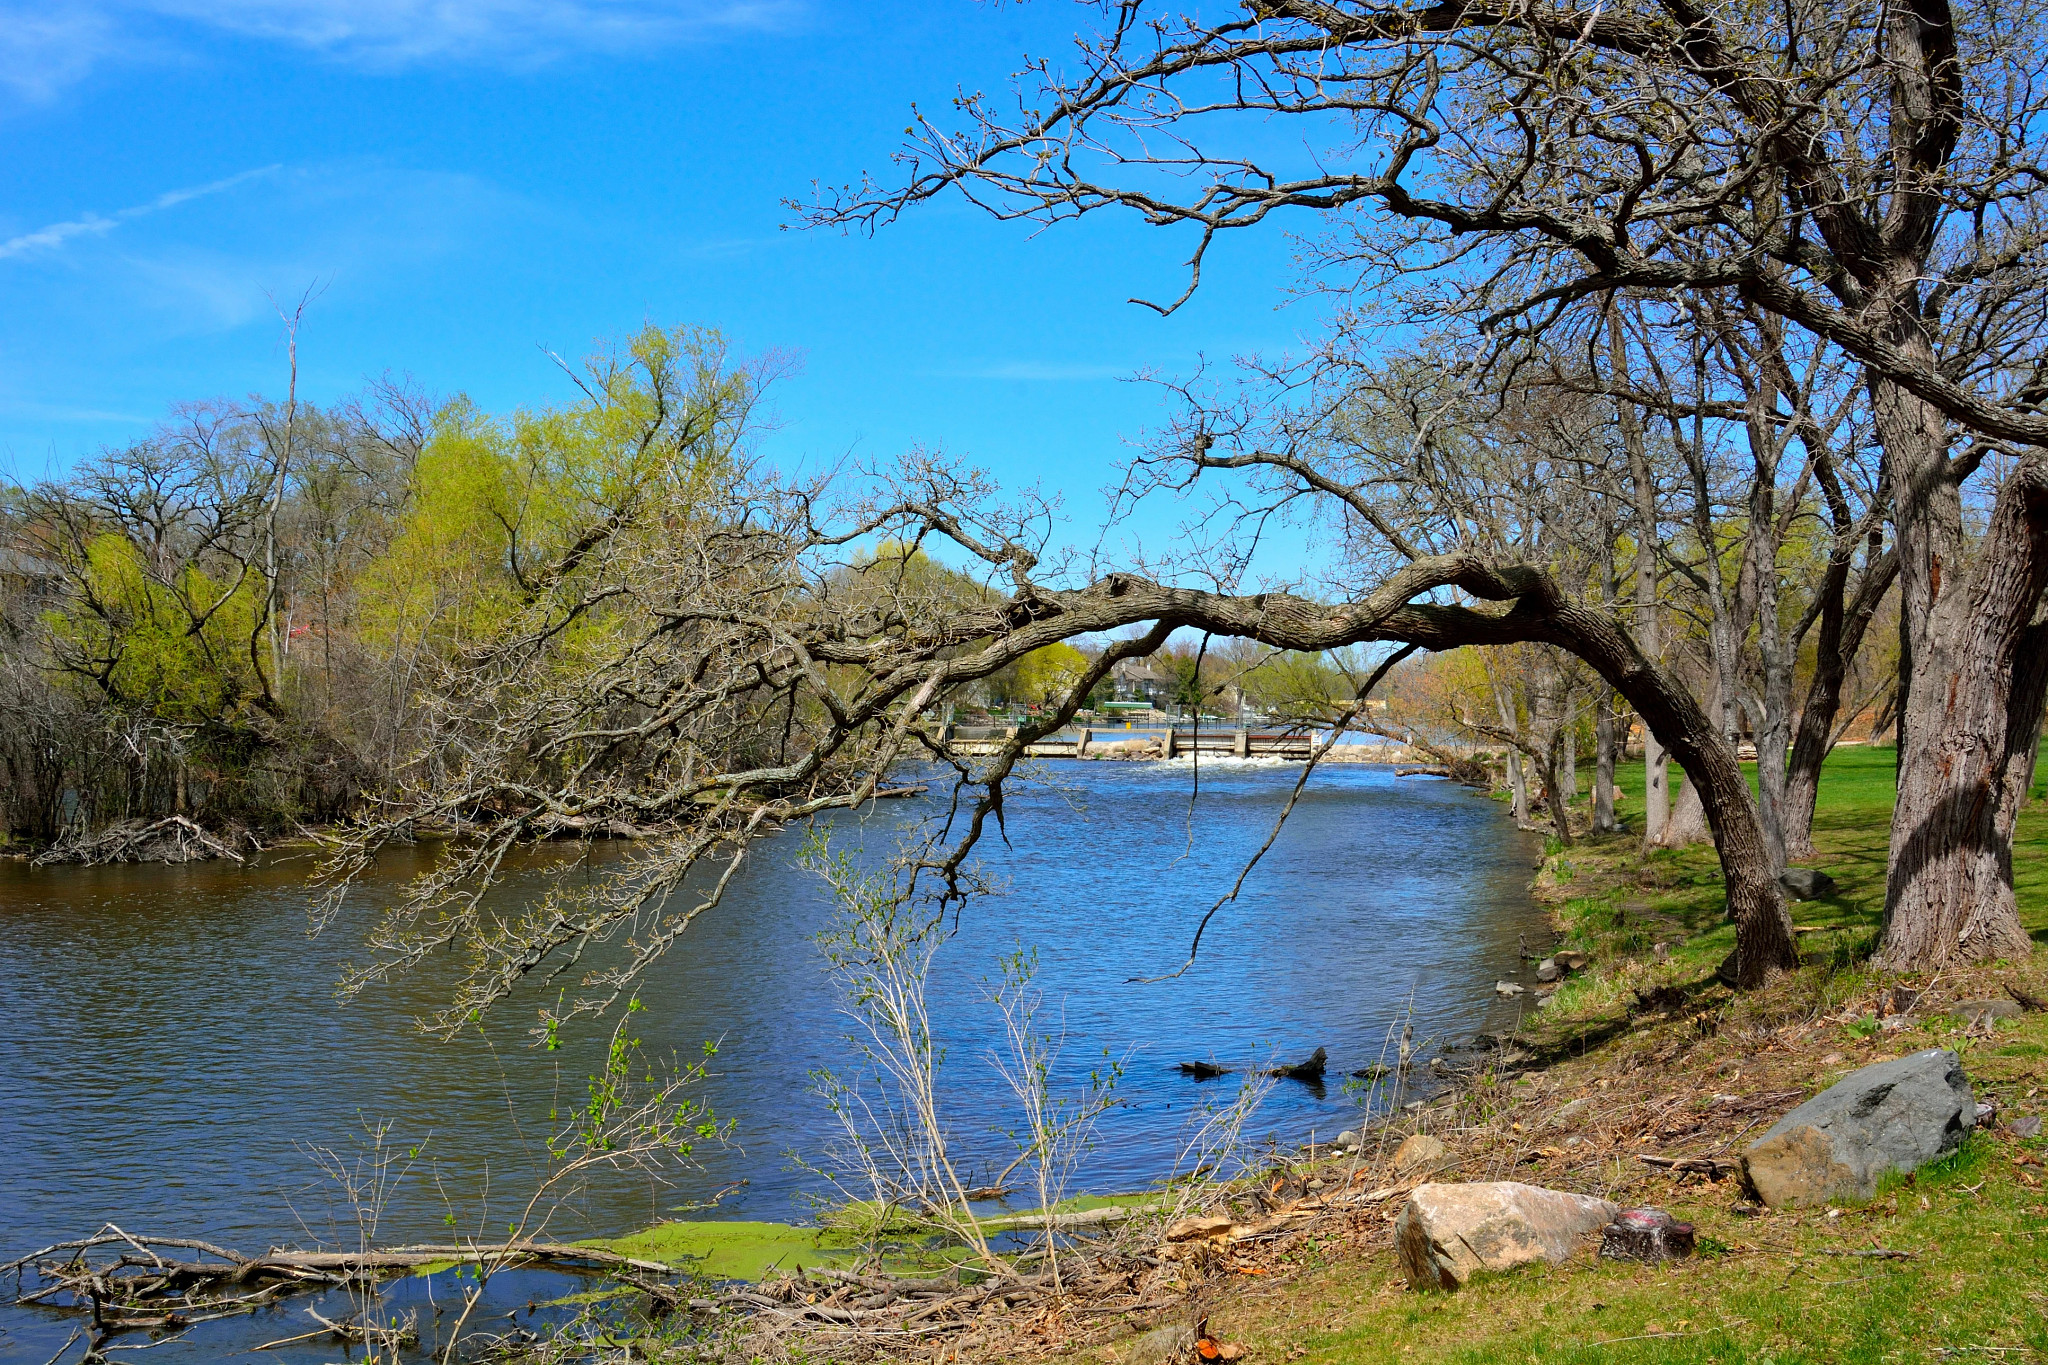 Looking northward toward the Rochester Wisconsin dam along the Fox River in April with the buds beginning to show greenery as springtime begins.